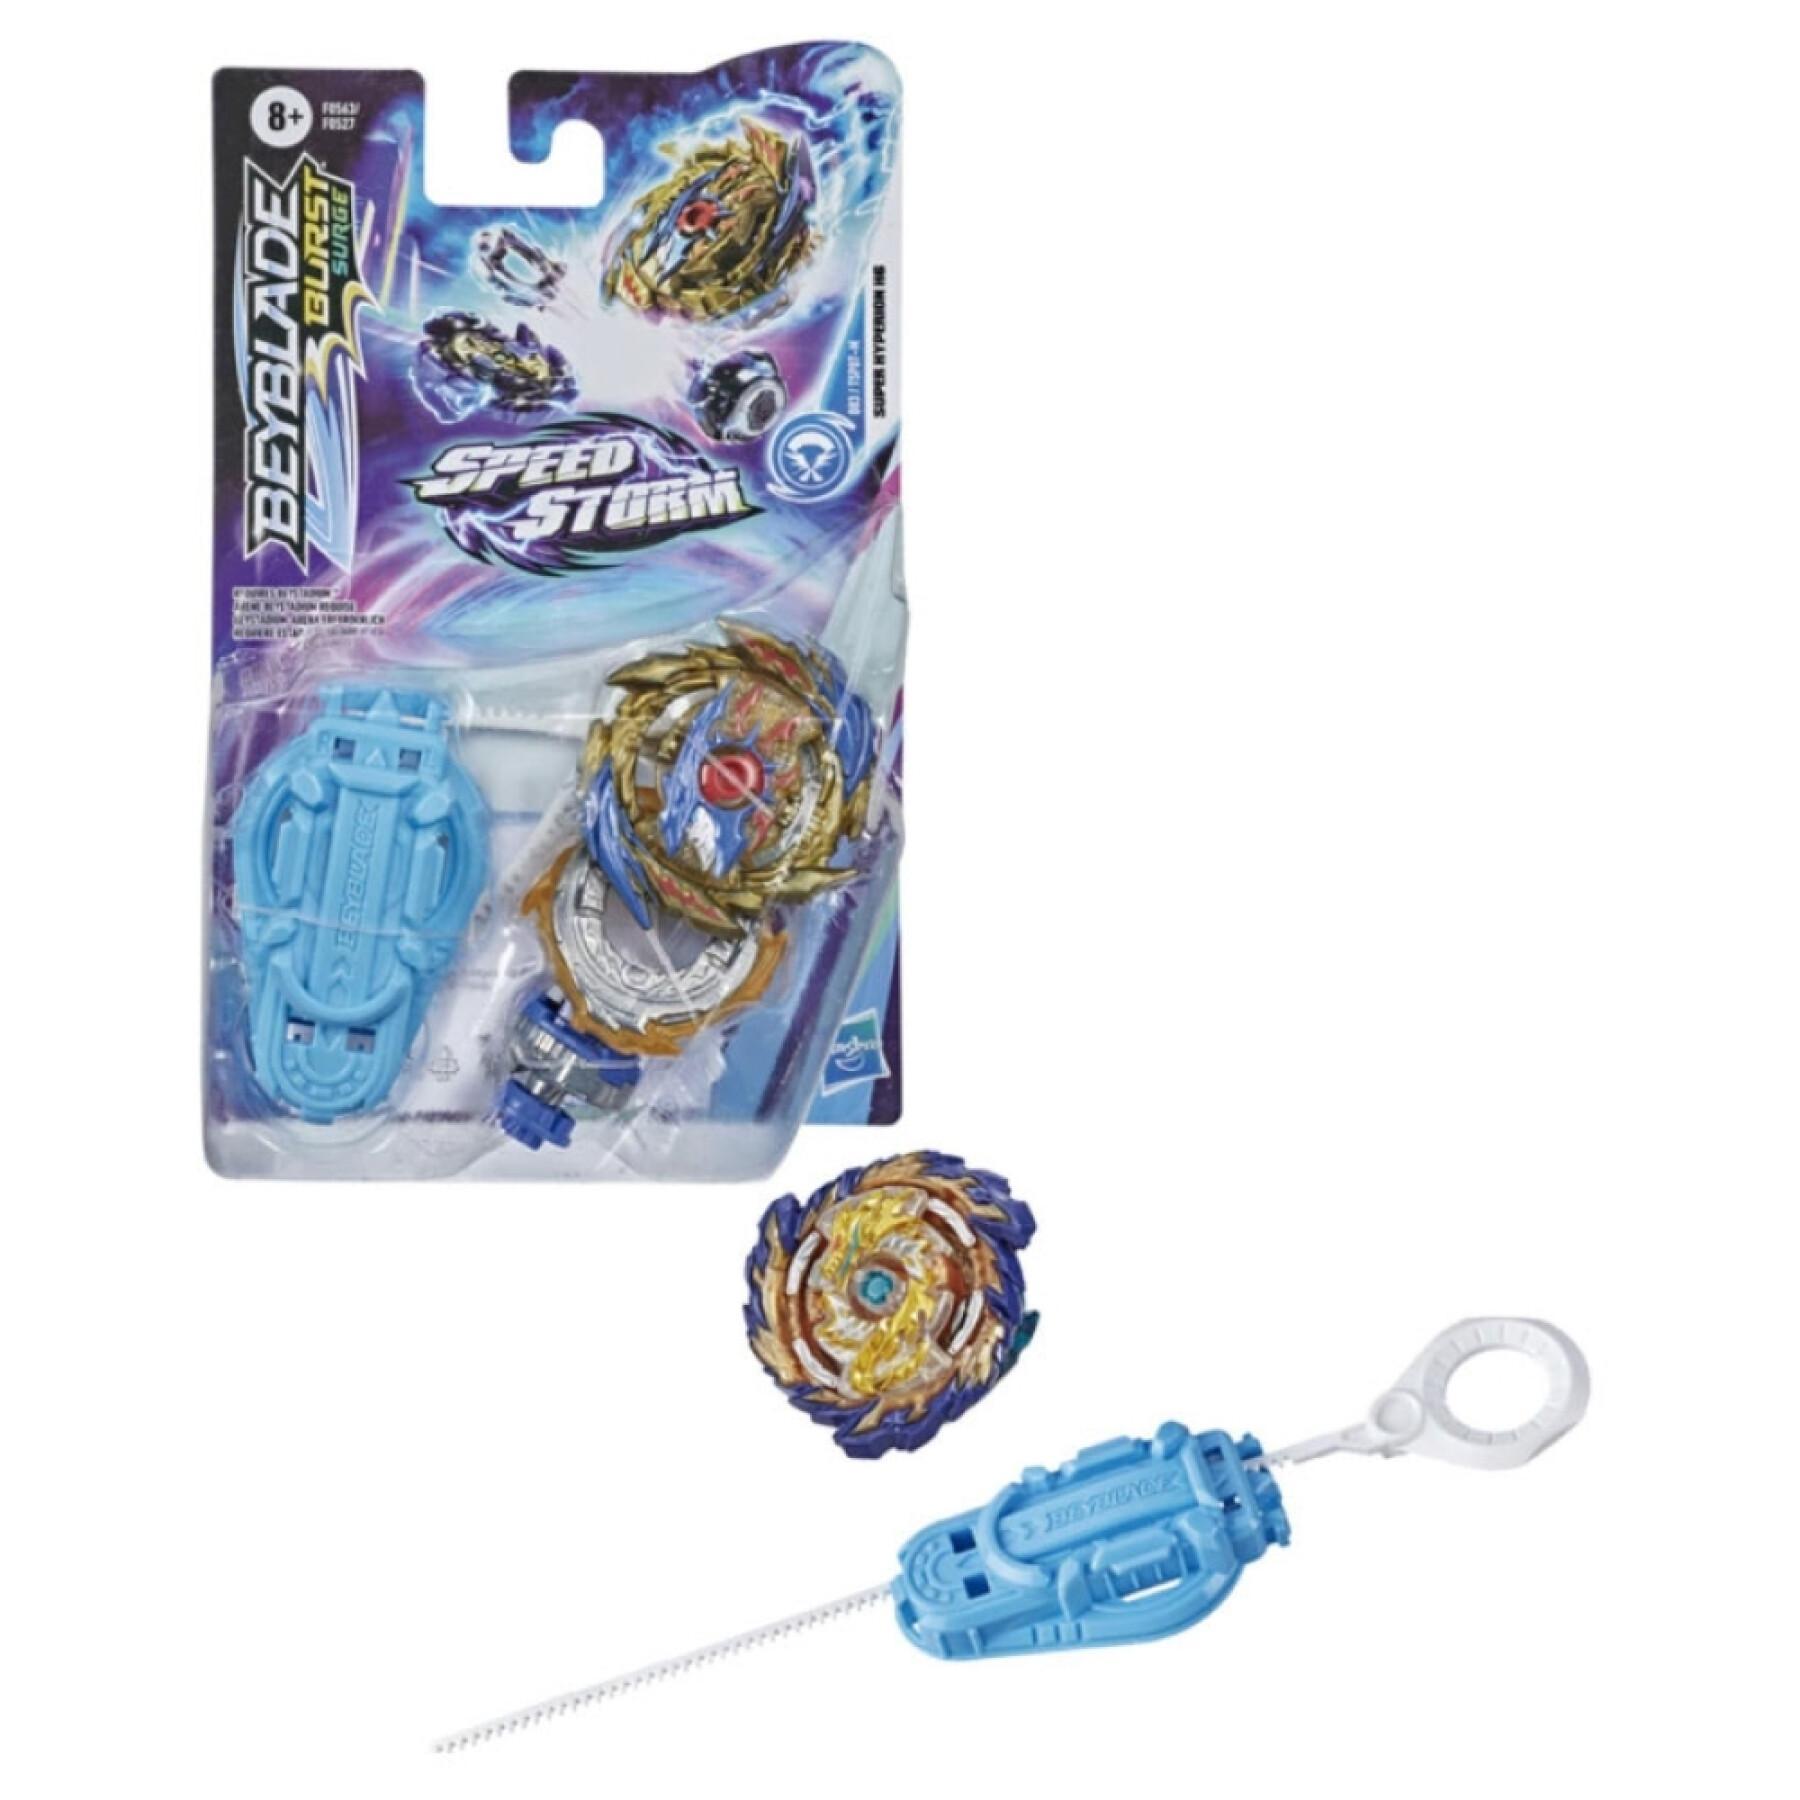 Spinning top and launcher pack Hasbro Beyblade